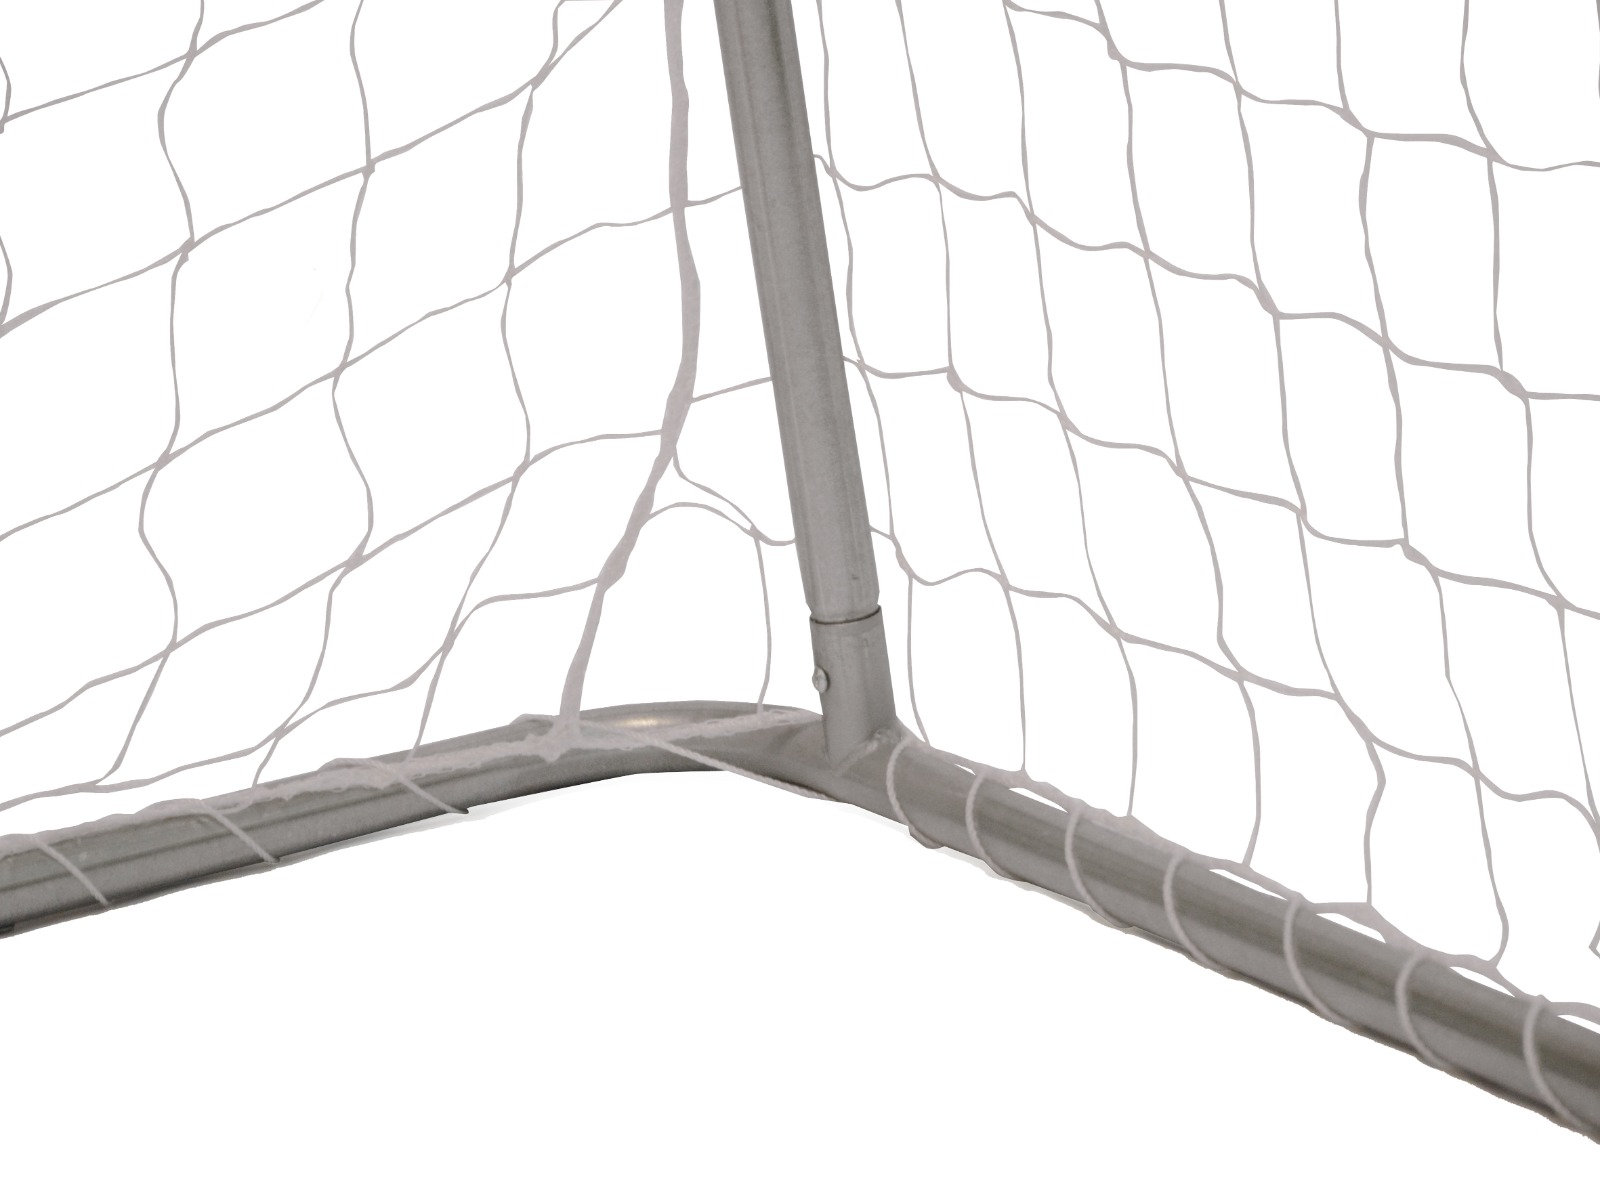 Soccer Goal Large - 300x200 + Practice Wall